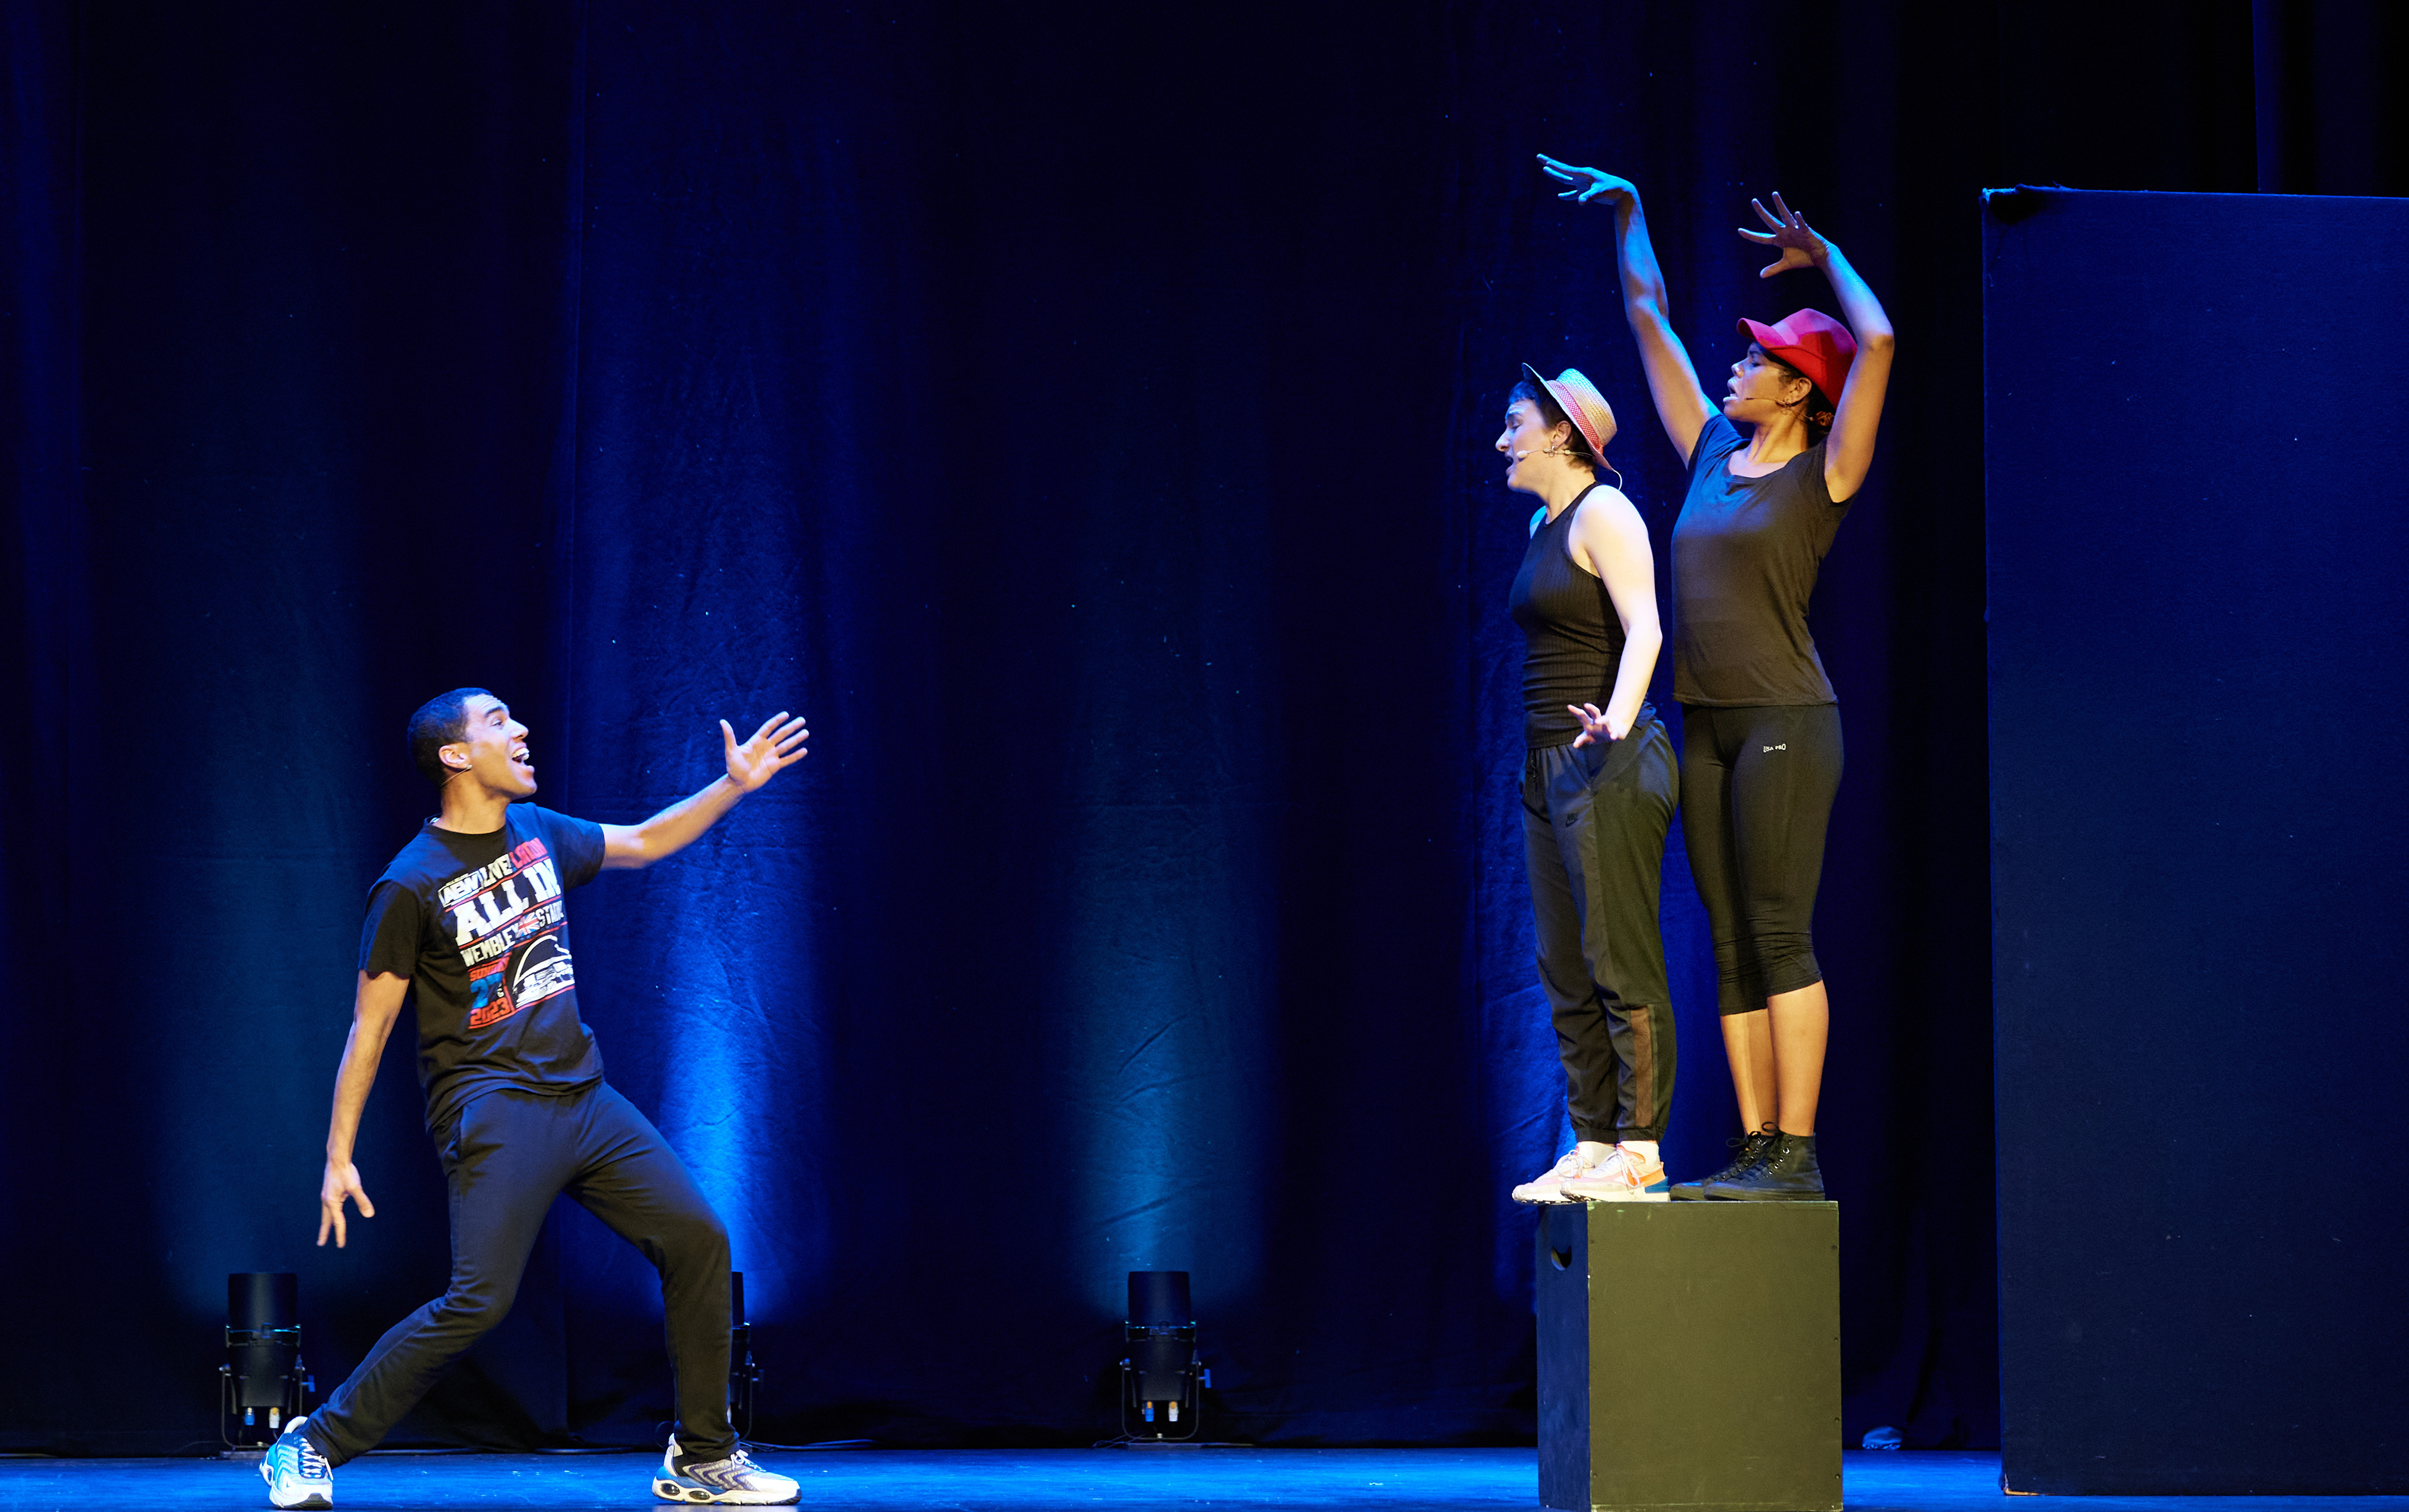 Two woman stand on a podium posing with hats on, a man stands below on the stage looking up with an arm outstretched